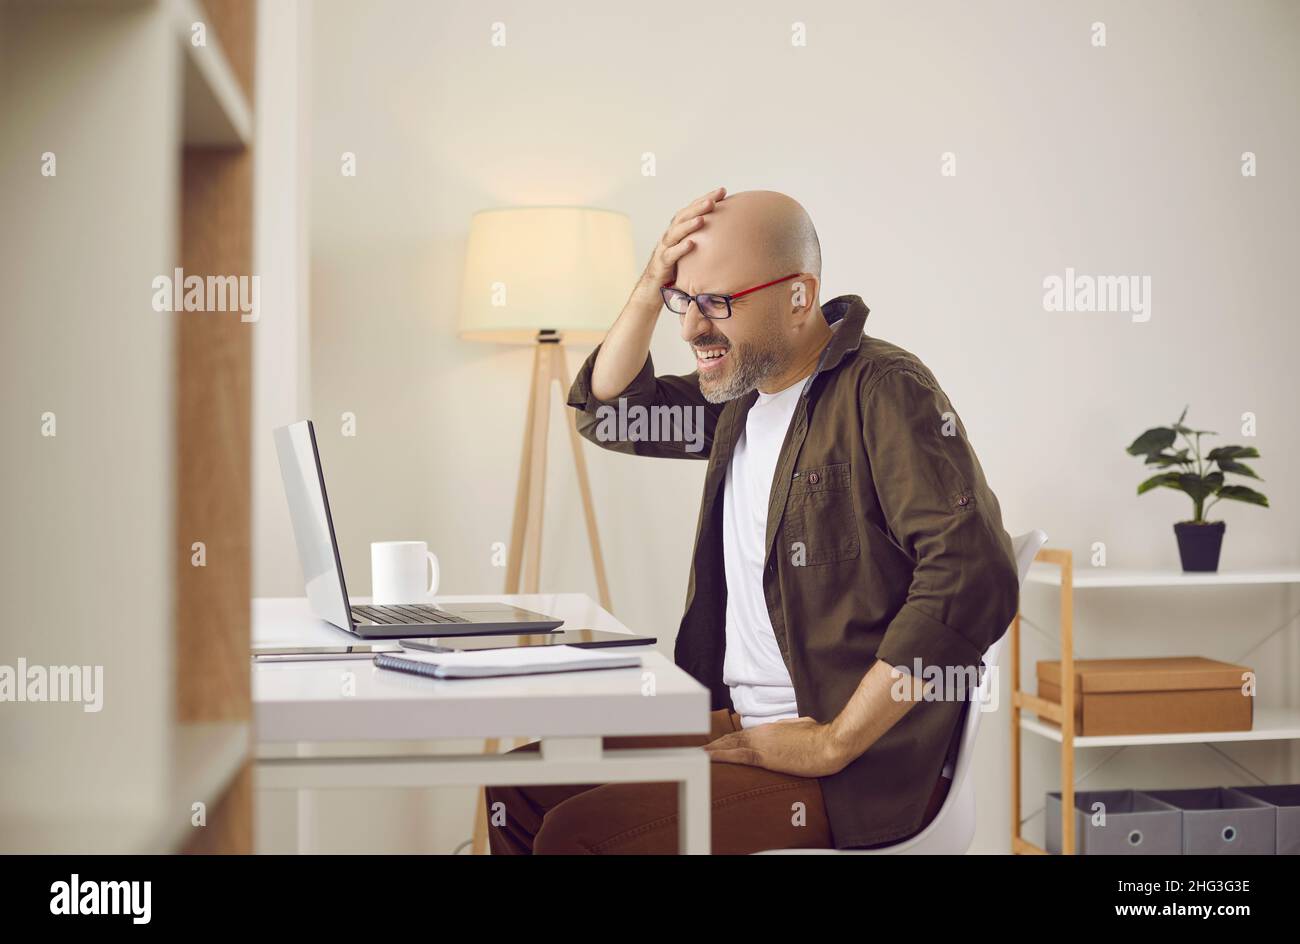 Man who makes mistake or forgets something while working on laptop slaps himself on face Stock Photo